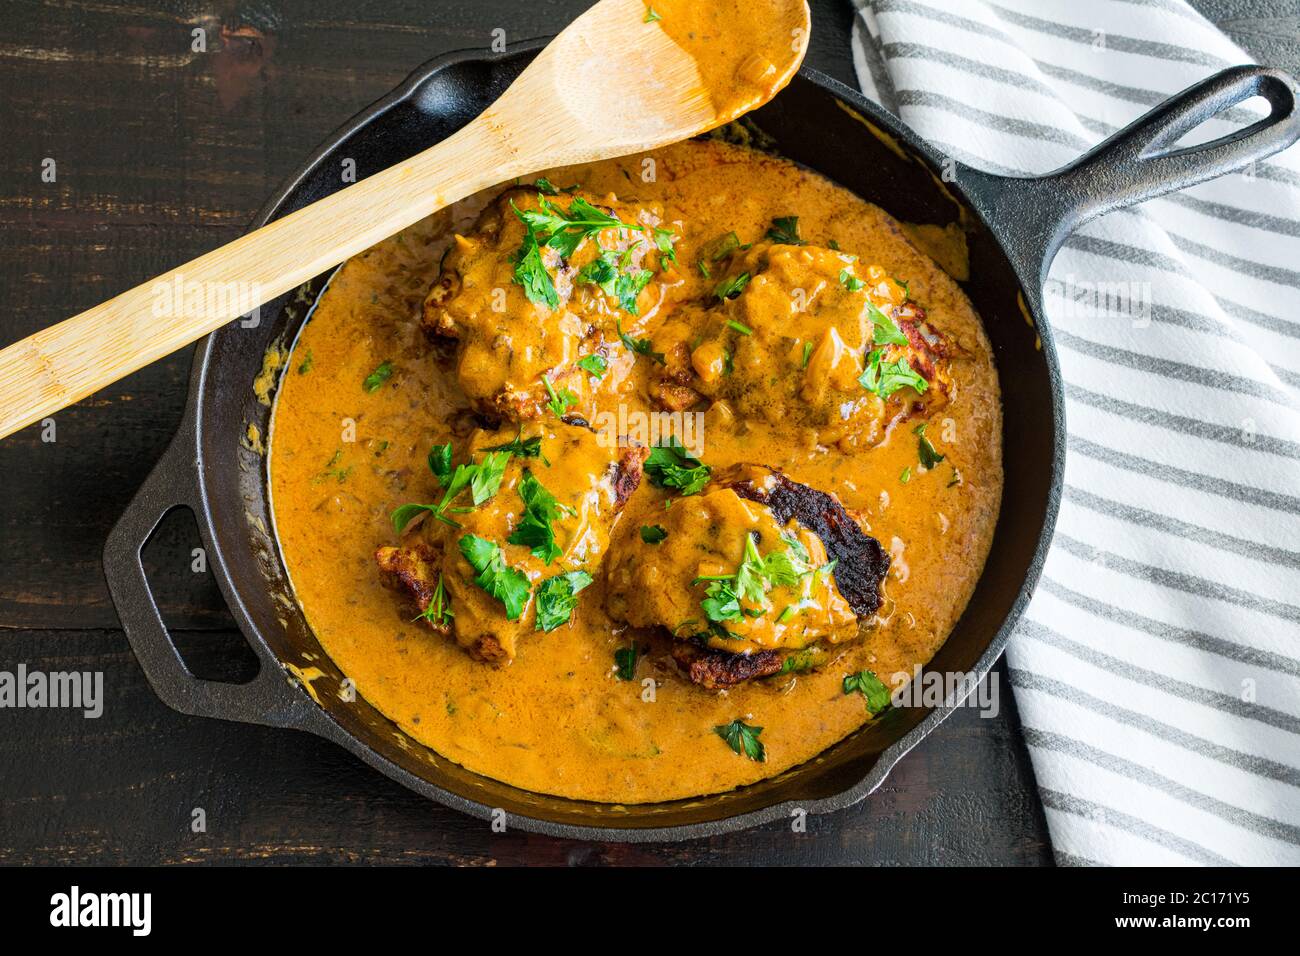 Hungarian Chicken Paprikash: Chicken thighs in a creamy paprika and sour cream sauce Stock Photo